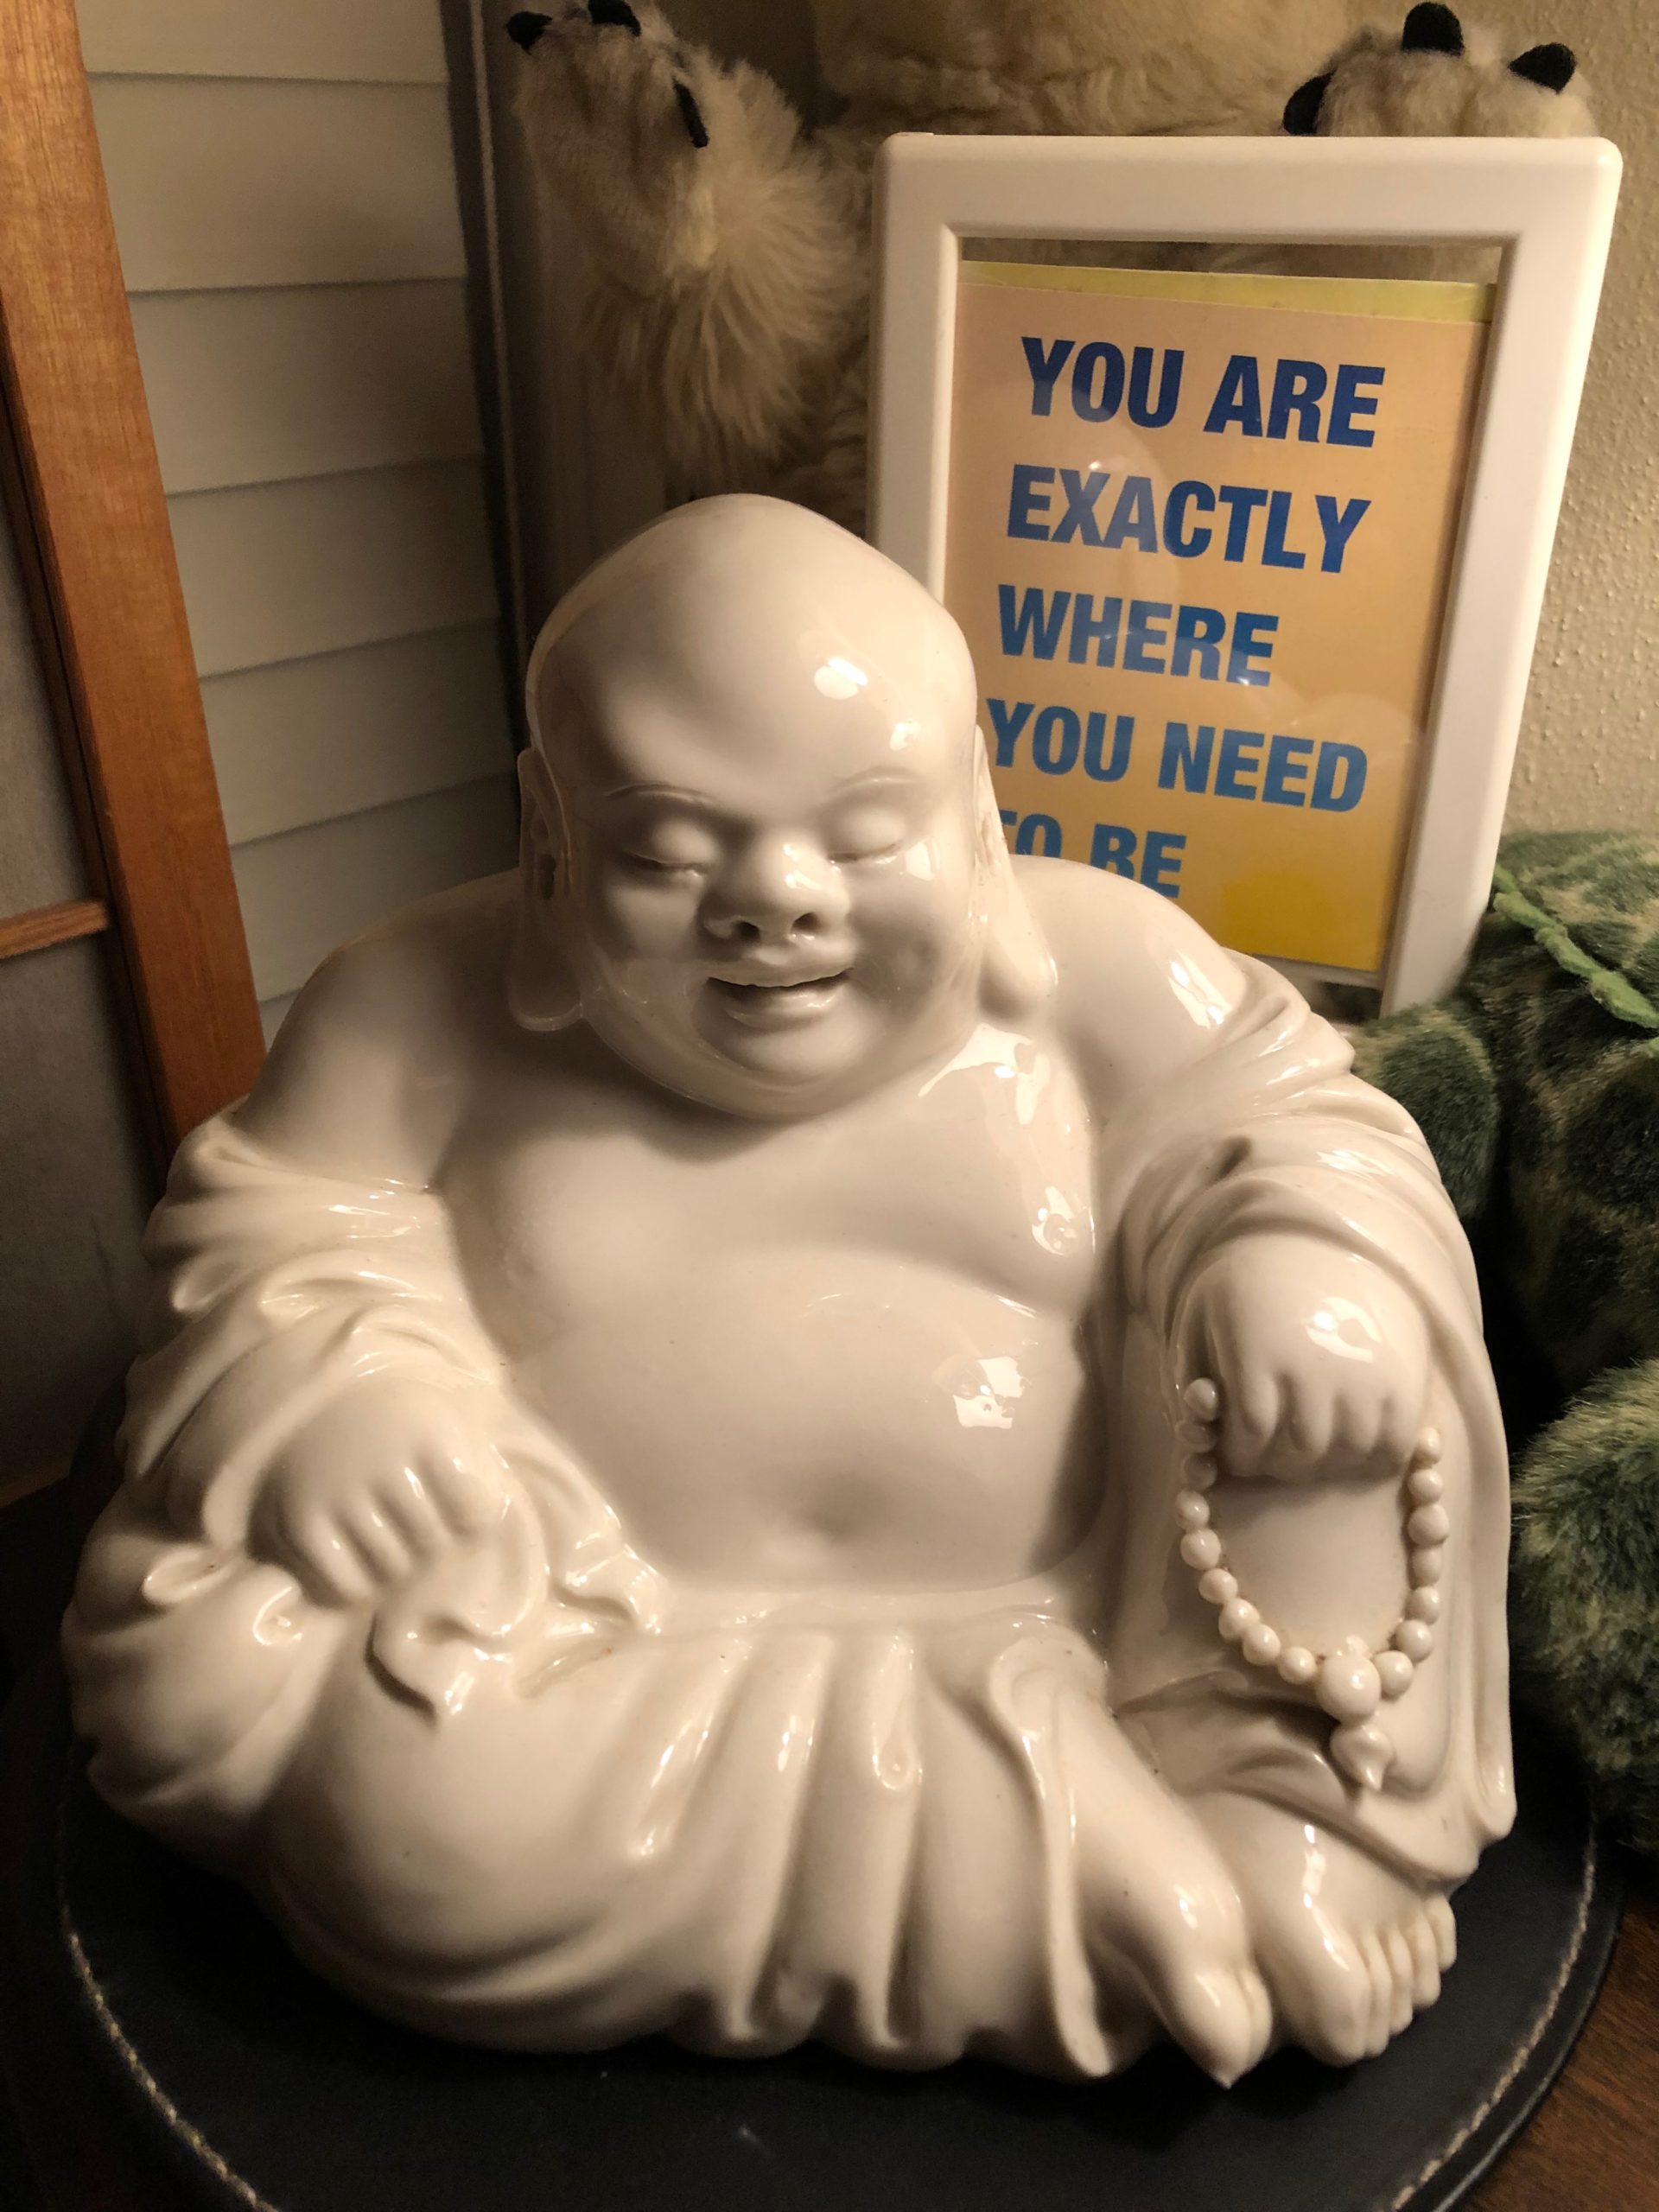 Buddha and sign:"You are exactly where you need to be"